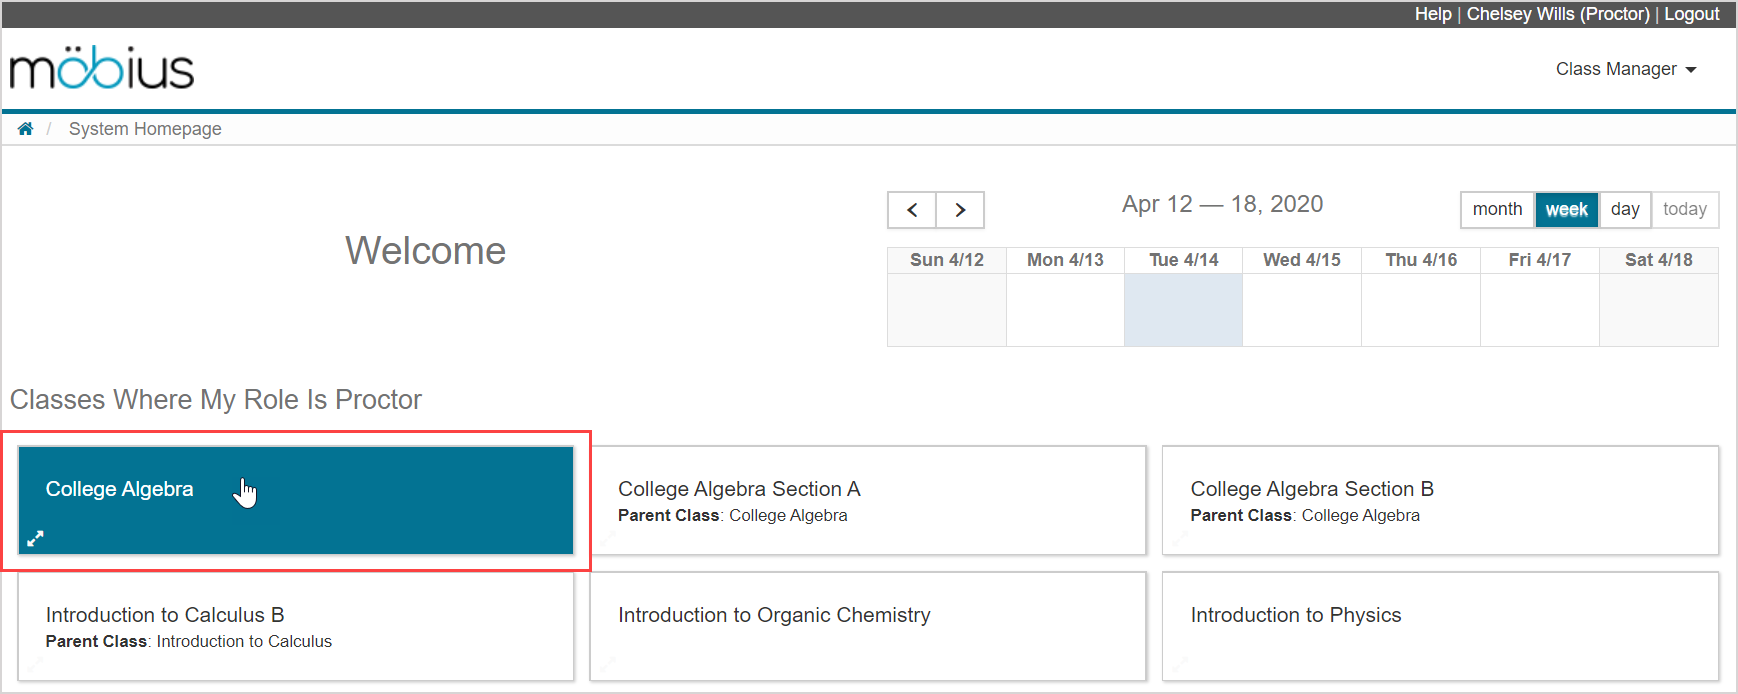 Classes that the user is enrolled in are listed on the System Homepage under the Classes Where My Role Is Proctor heading.